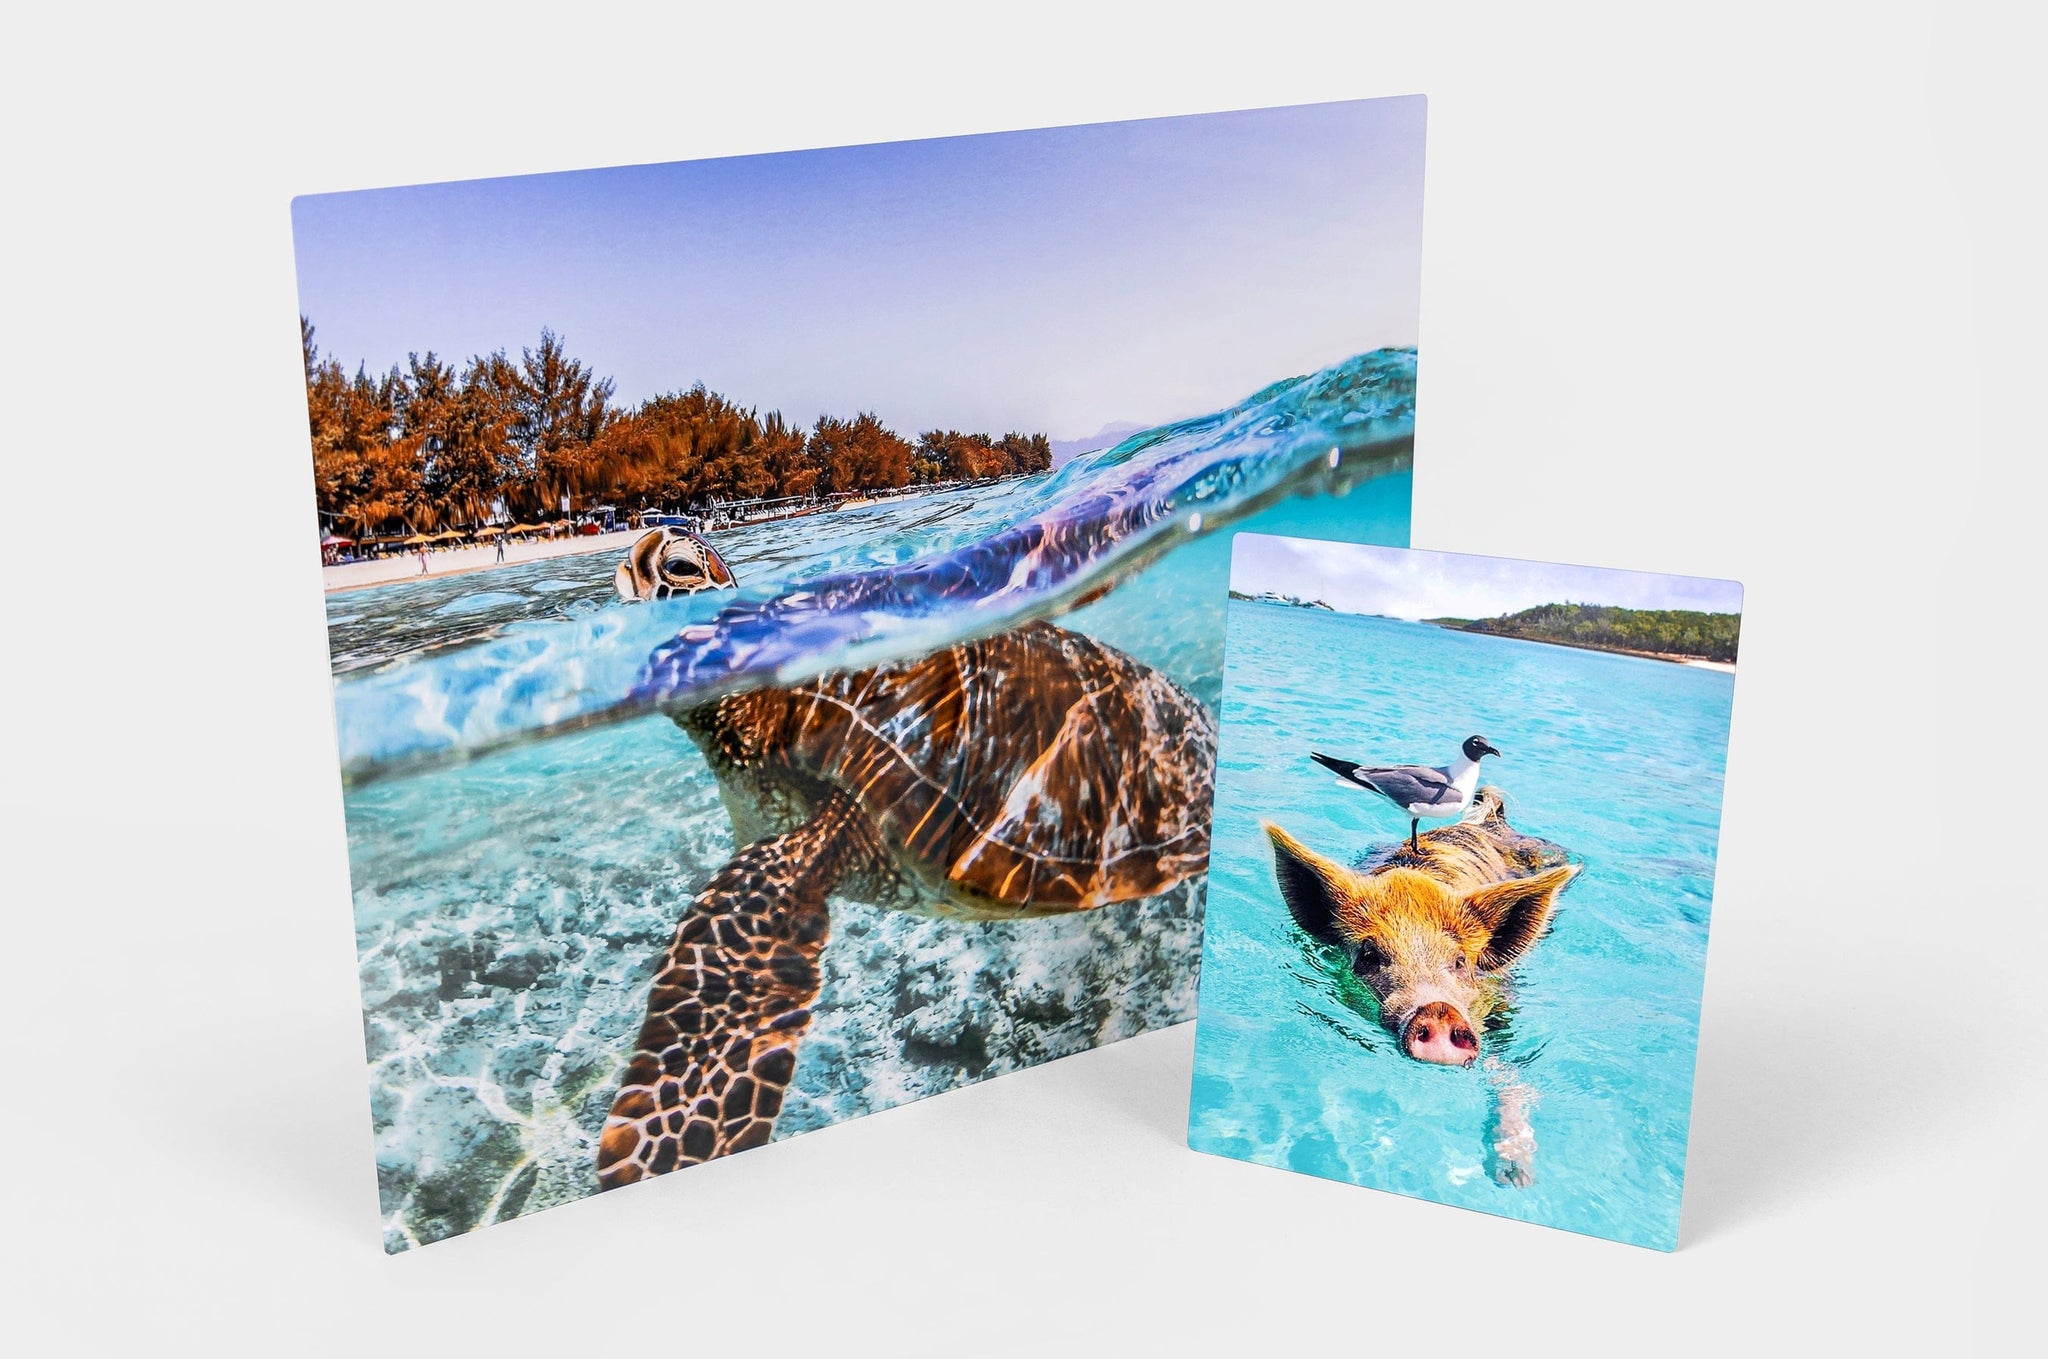 Two Metal Prints standing on a white background, the 20x30" Metal Print feature a photo of a sea turtle and the 8x10" Metal Print has a photo of a pig swimming with a seagull on it's head. 